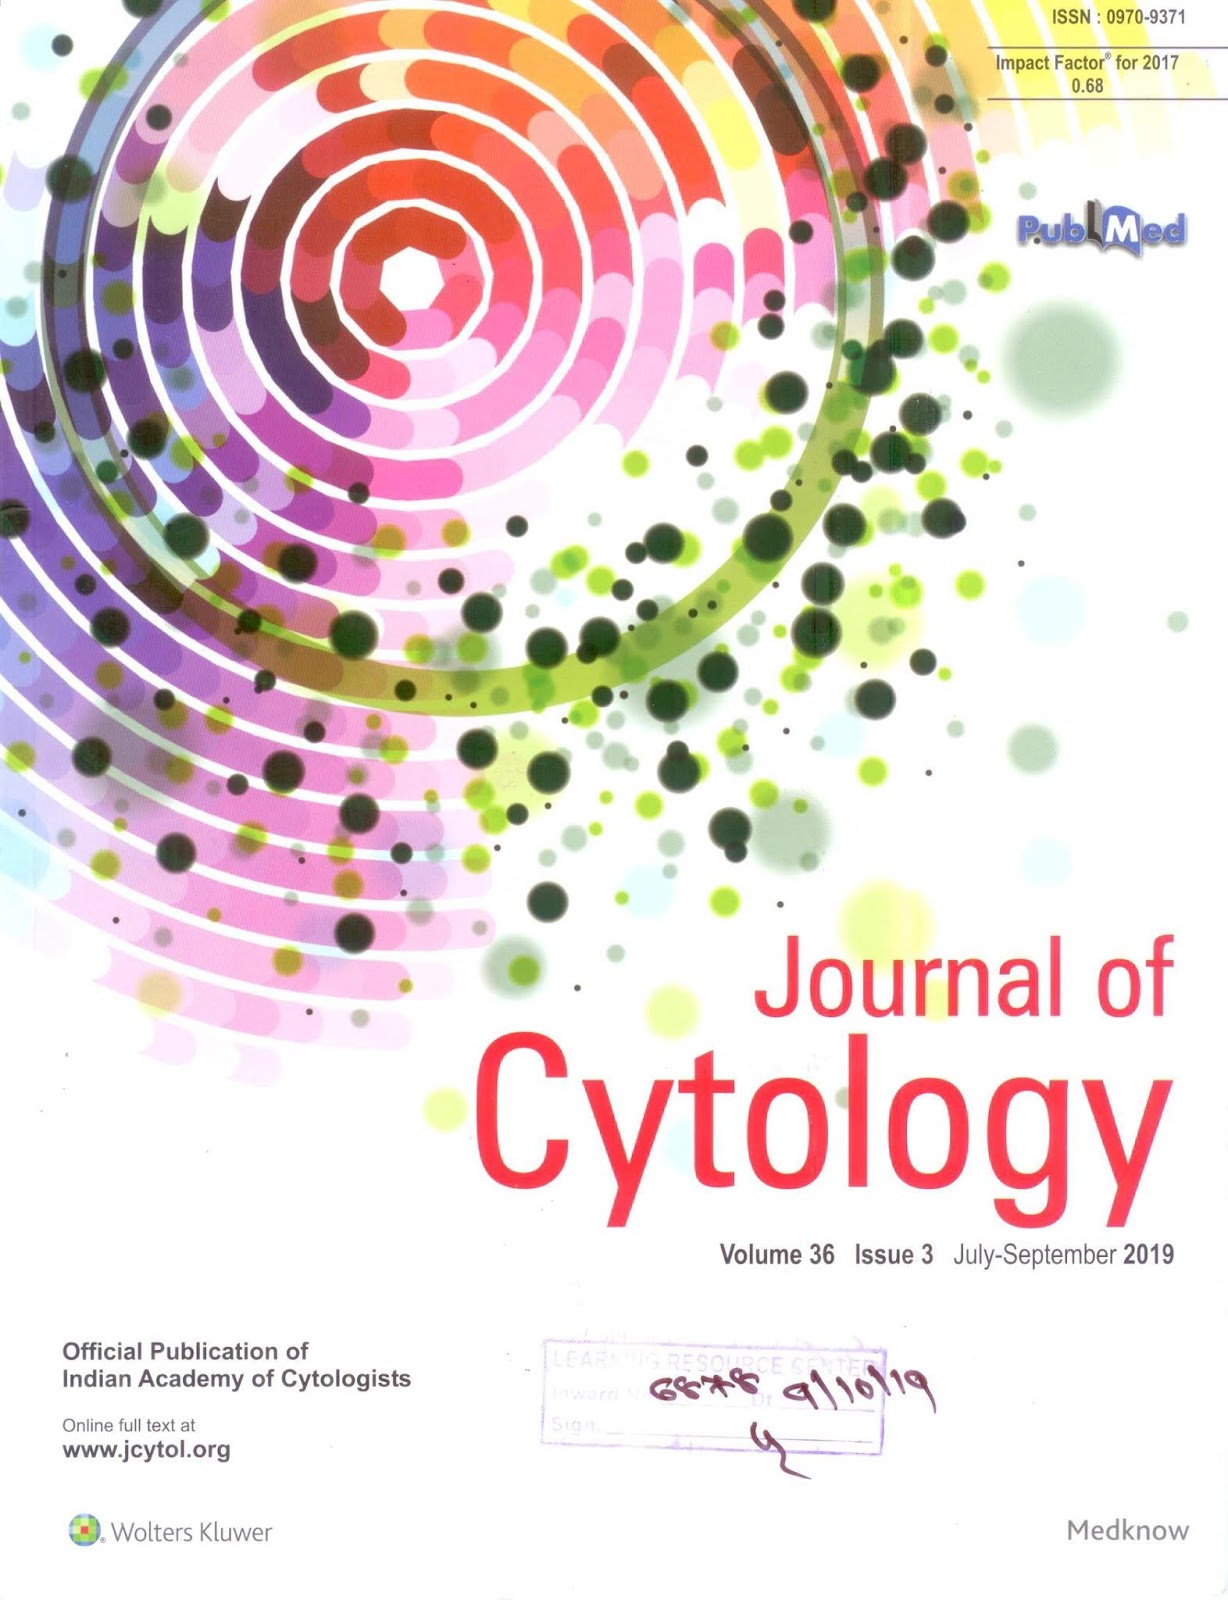 http://www.jcytol.org/showBackIssue.asp?issn=0970-9371;year=2019;volume=36;issue=3;month=July-September